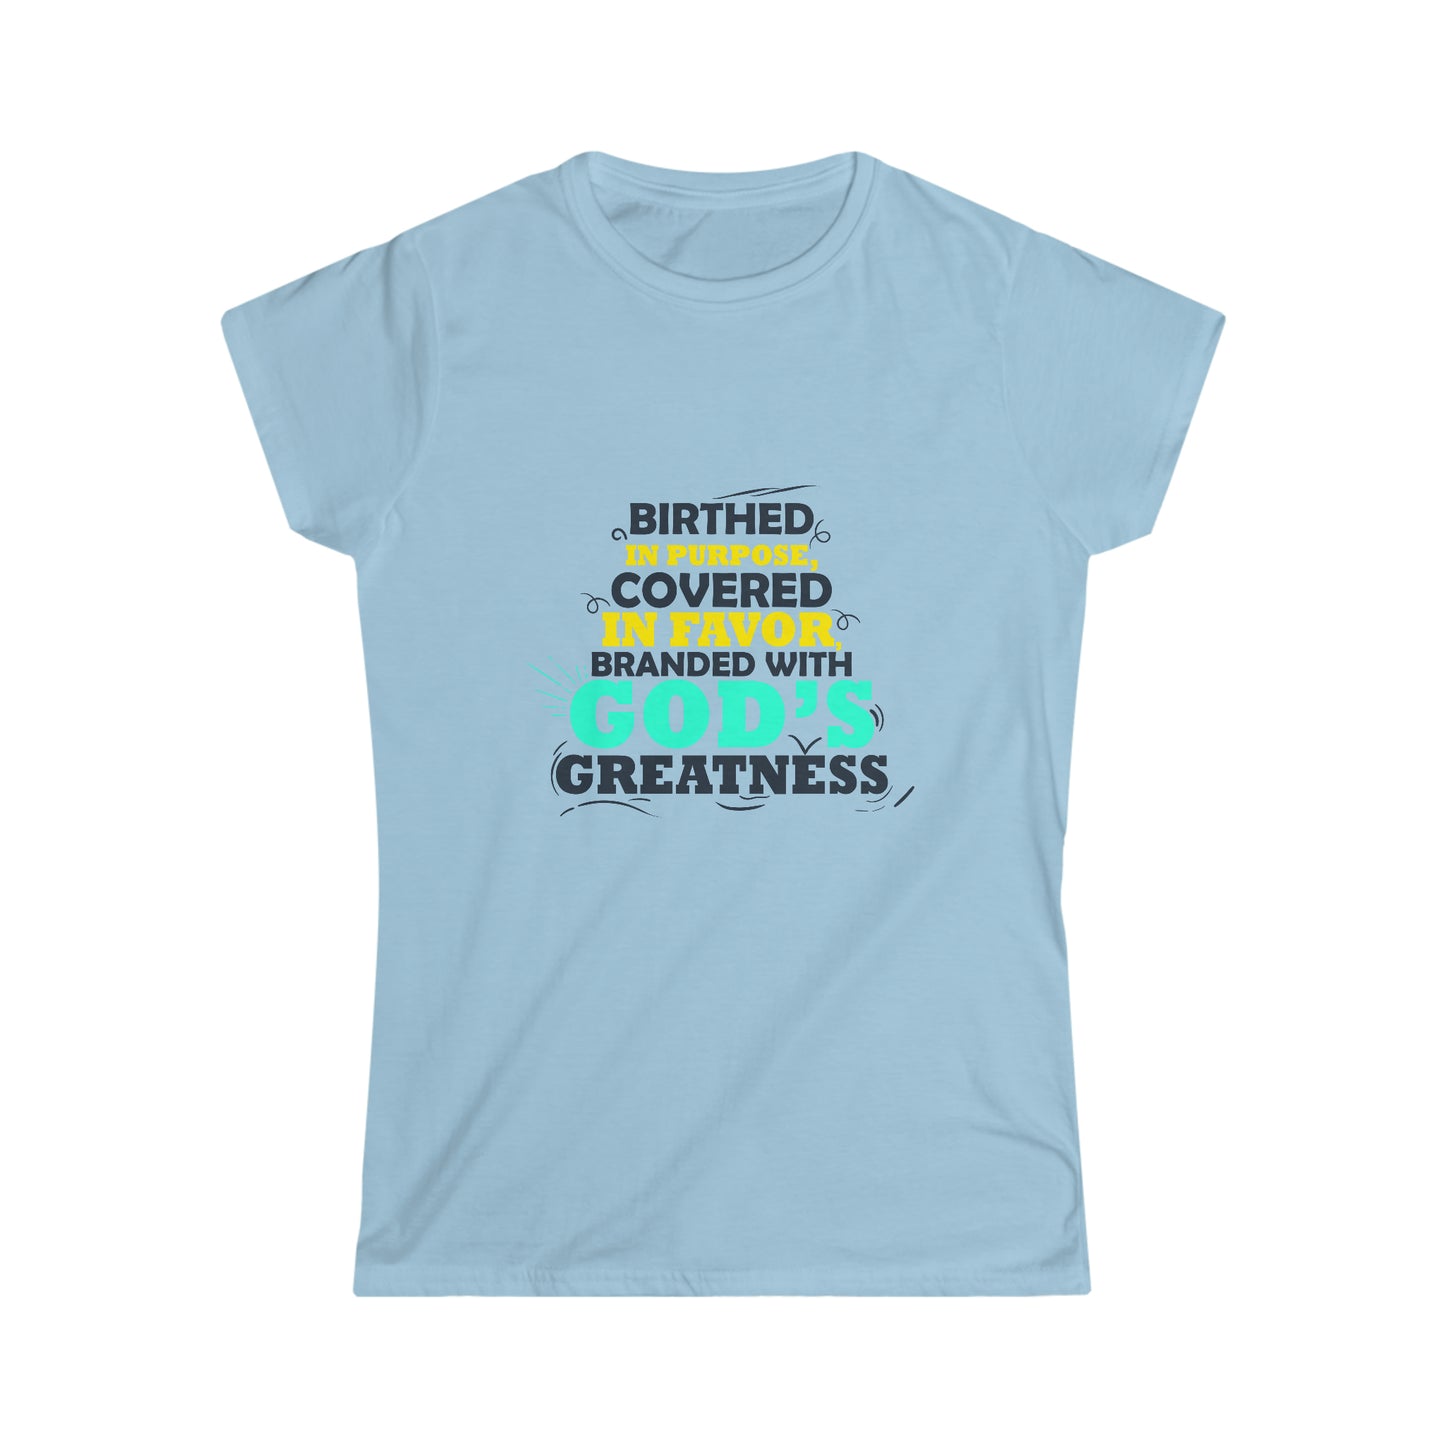 Birthed In Purpose, Covered in Favor, Branded With God's Greatness Women's T-shirt